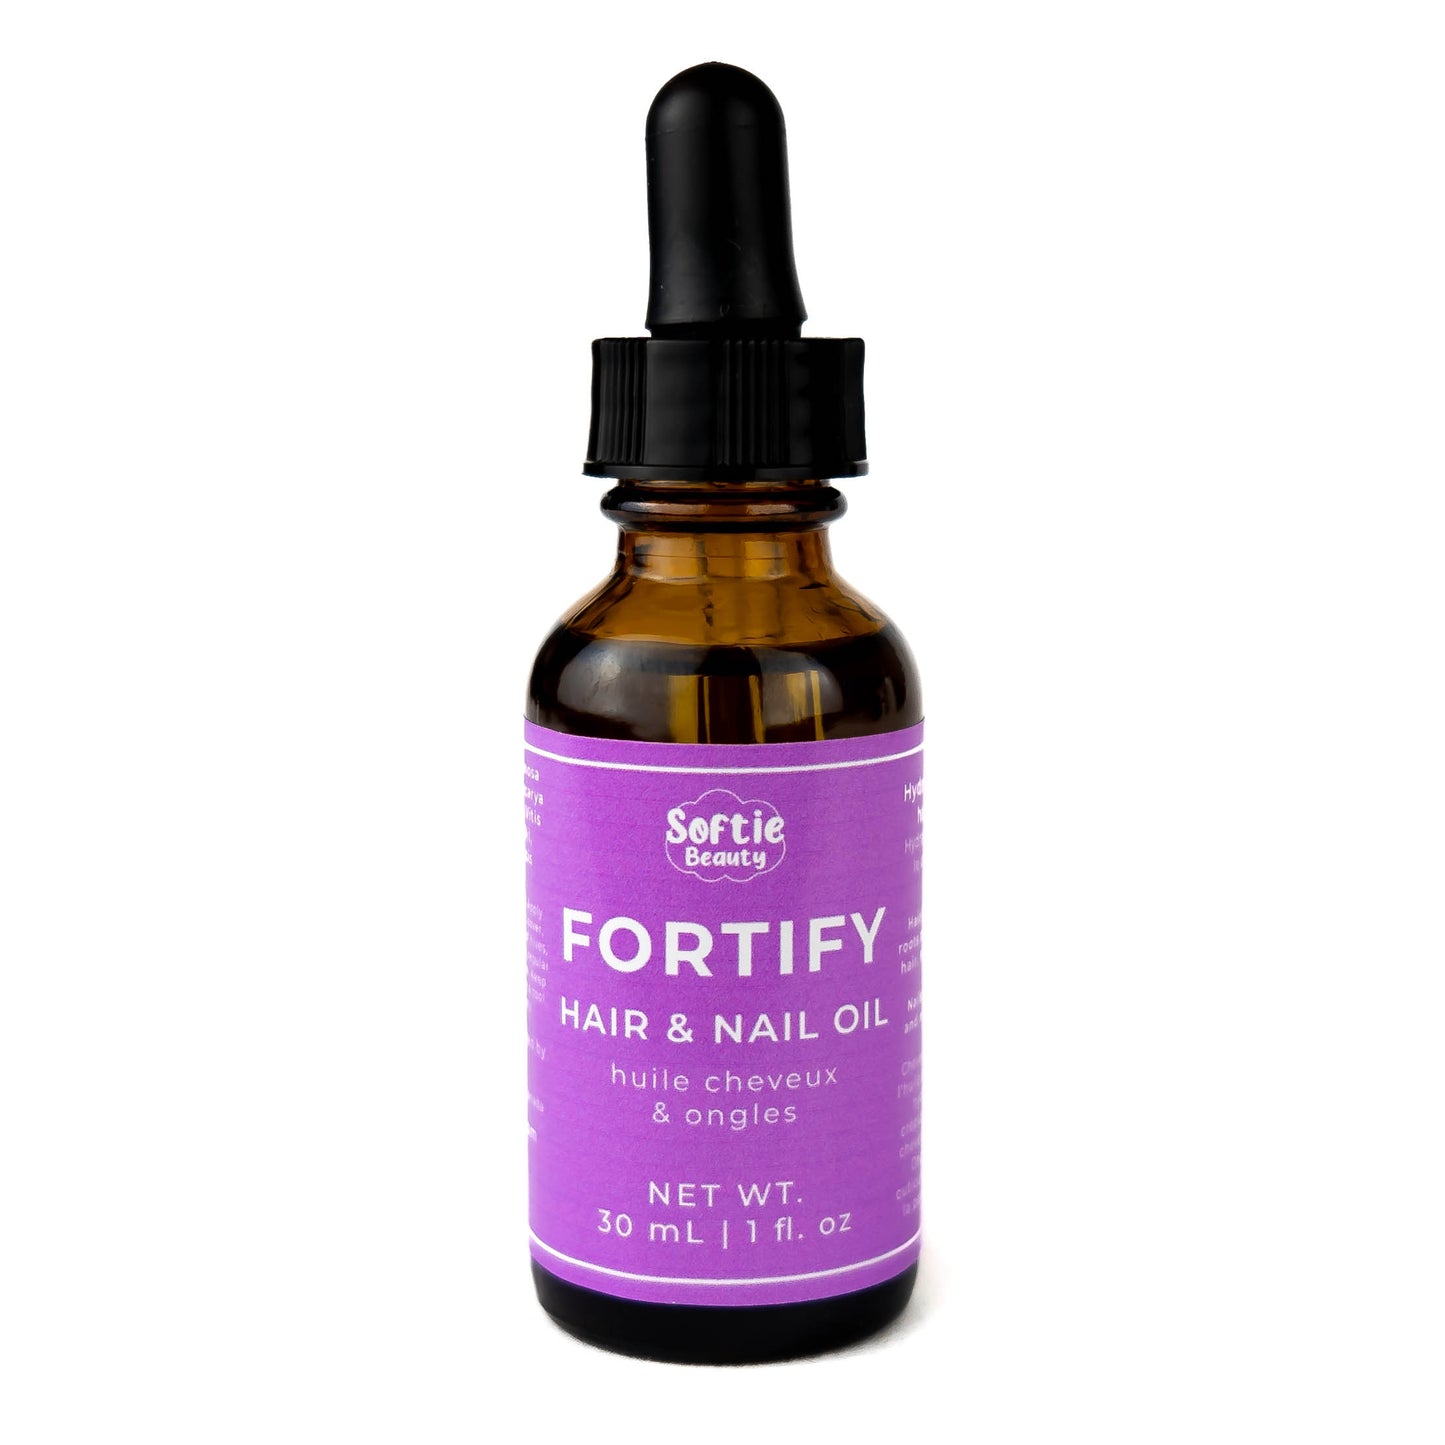 FORTIFY Hair & Nail Oil